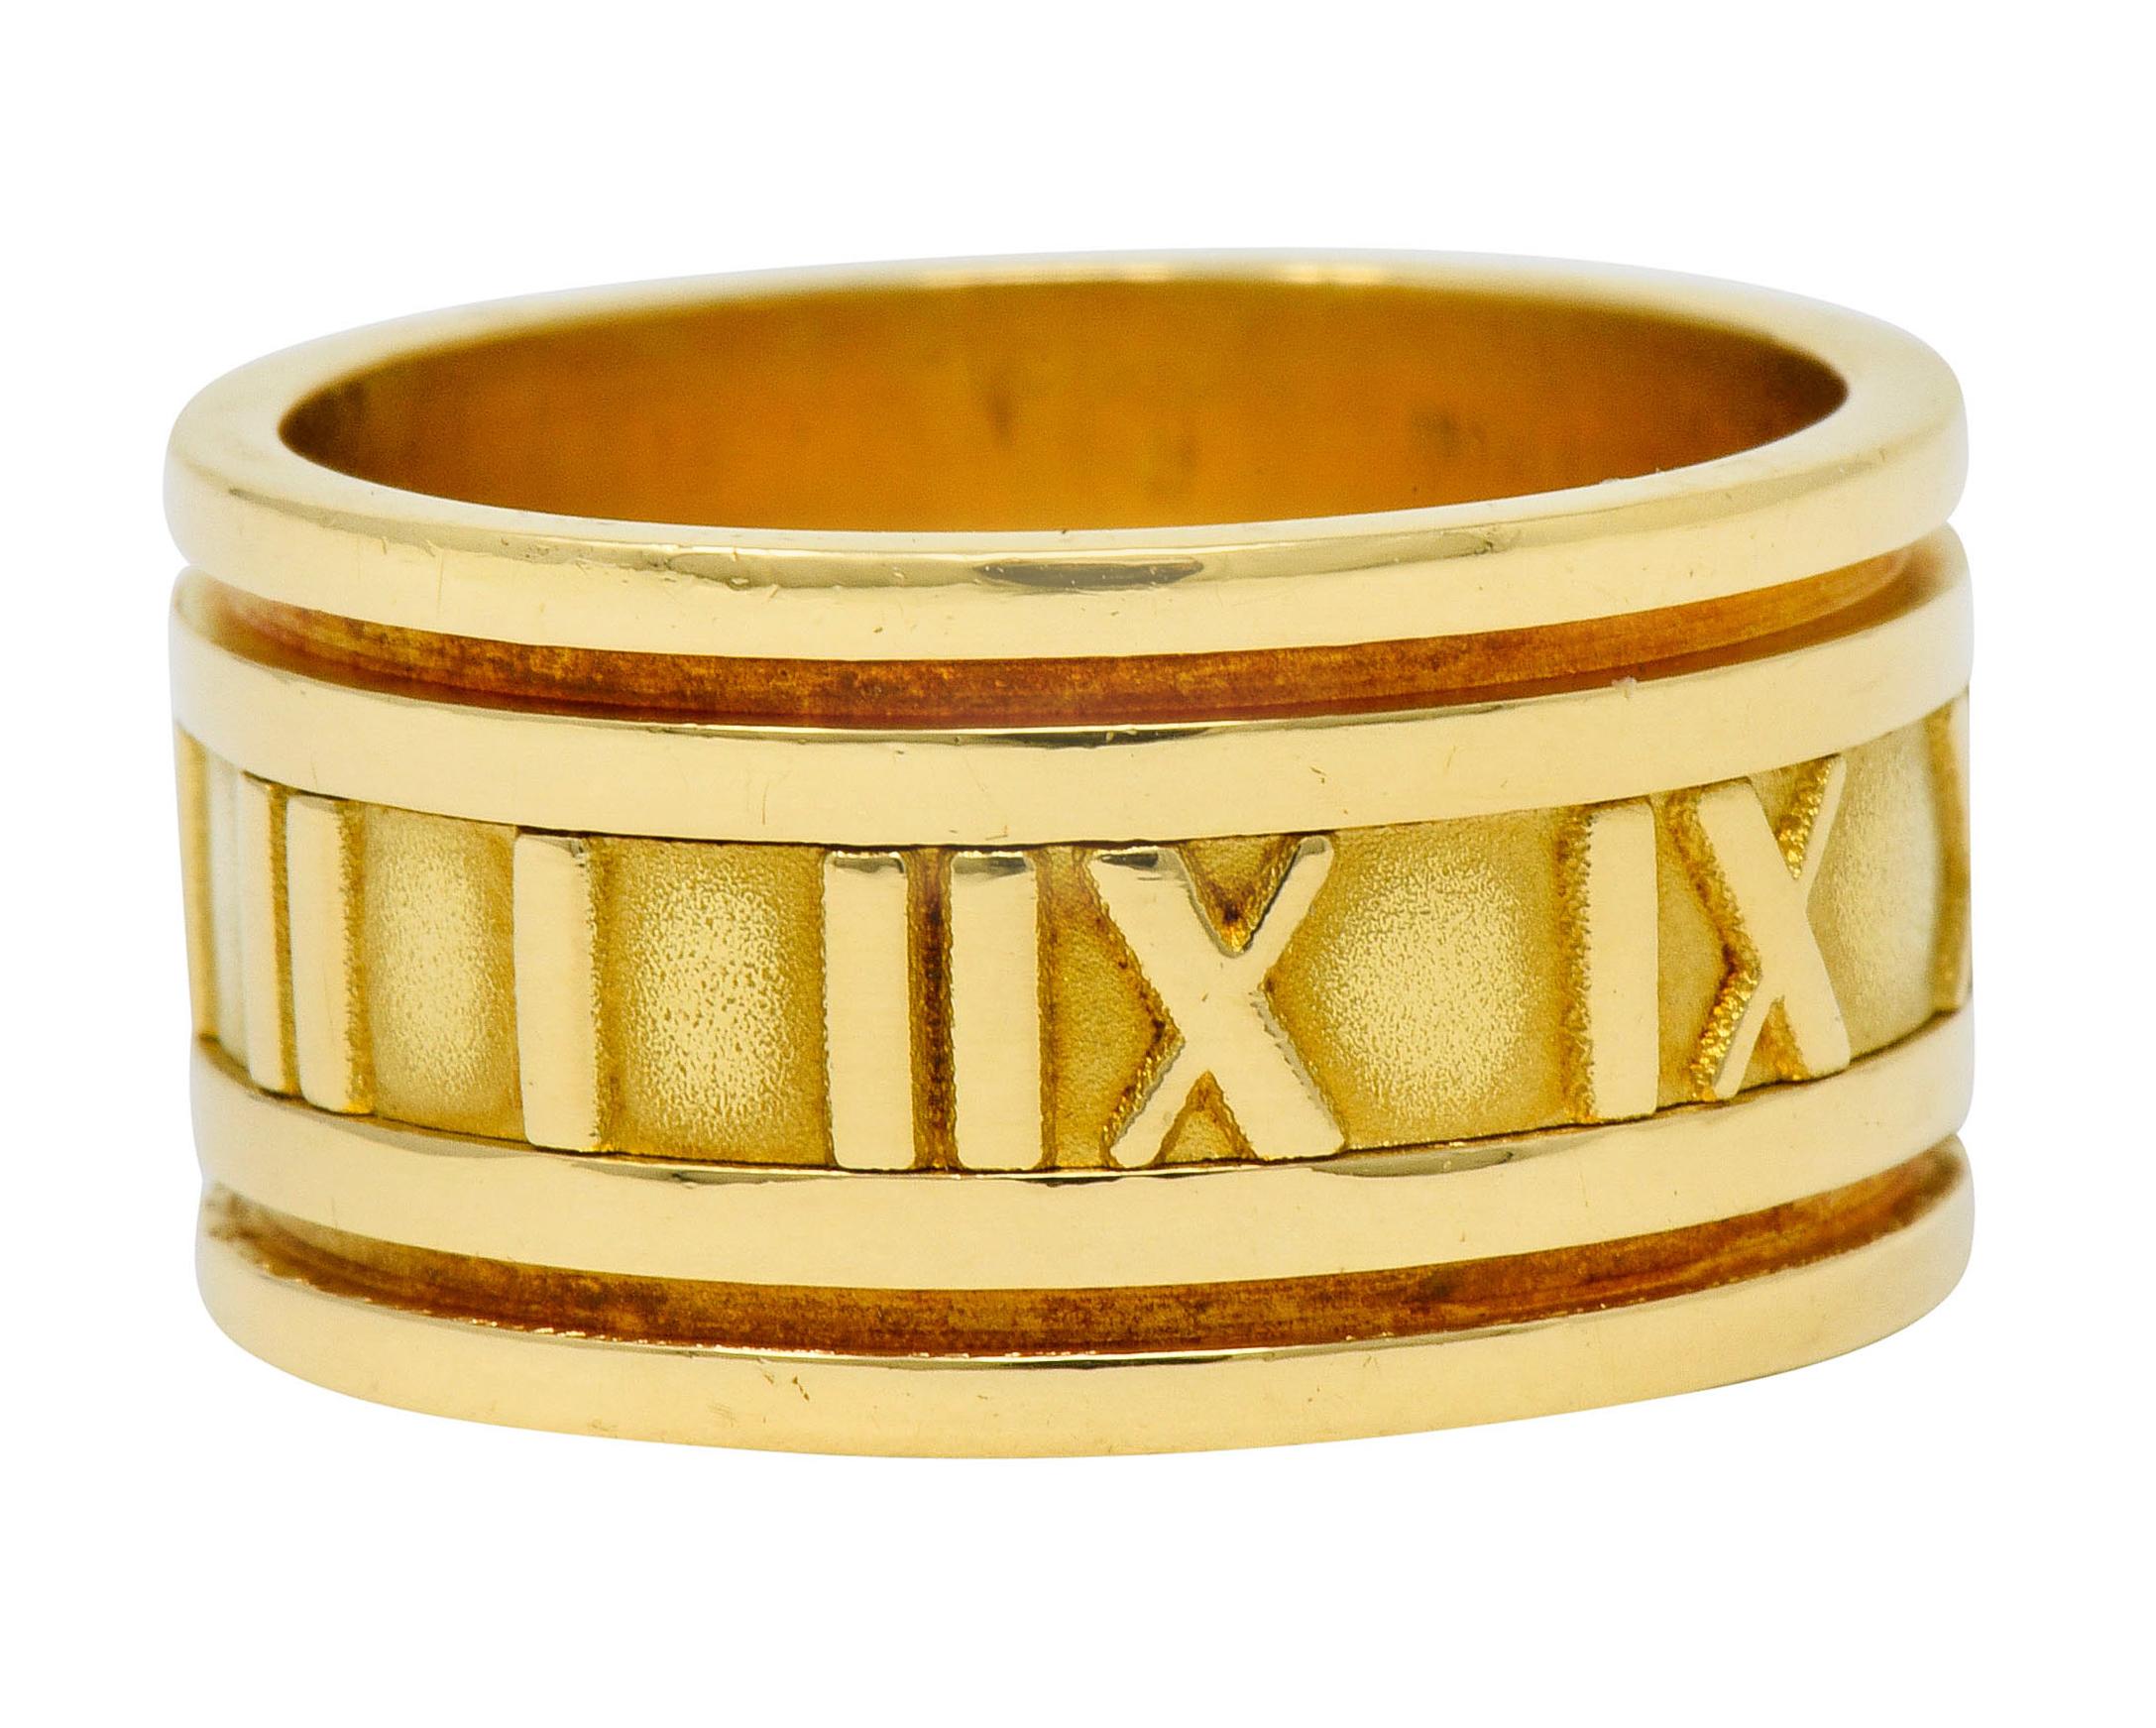 Wide band ring centering raised and brightly polished Roman numerals against a matte gold background

Flanked by deeply grooved channels

Fully signed Tiffany & Co. Italy 1995

Stamped 750 for 18 karat gold

From the vintage 1990's Atlas